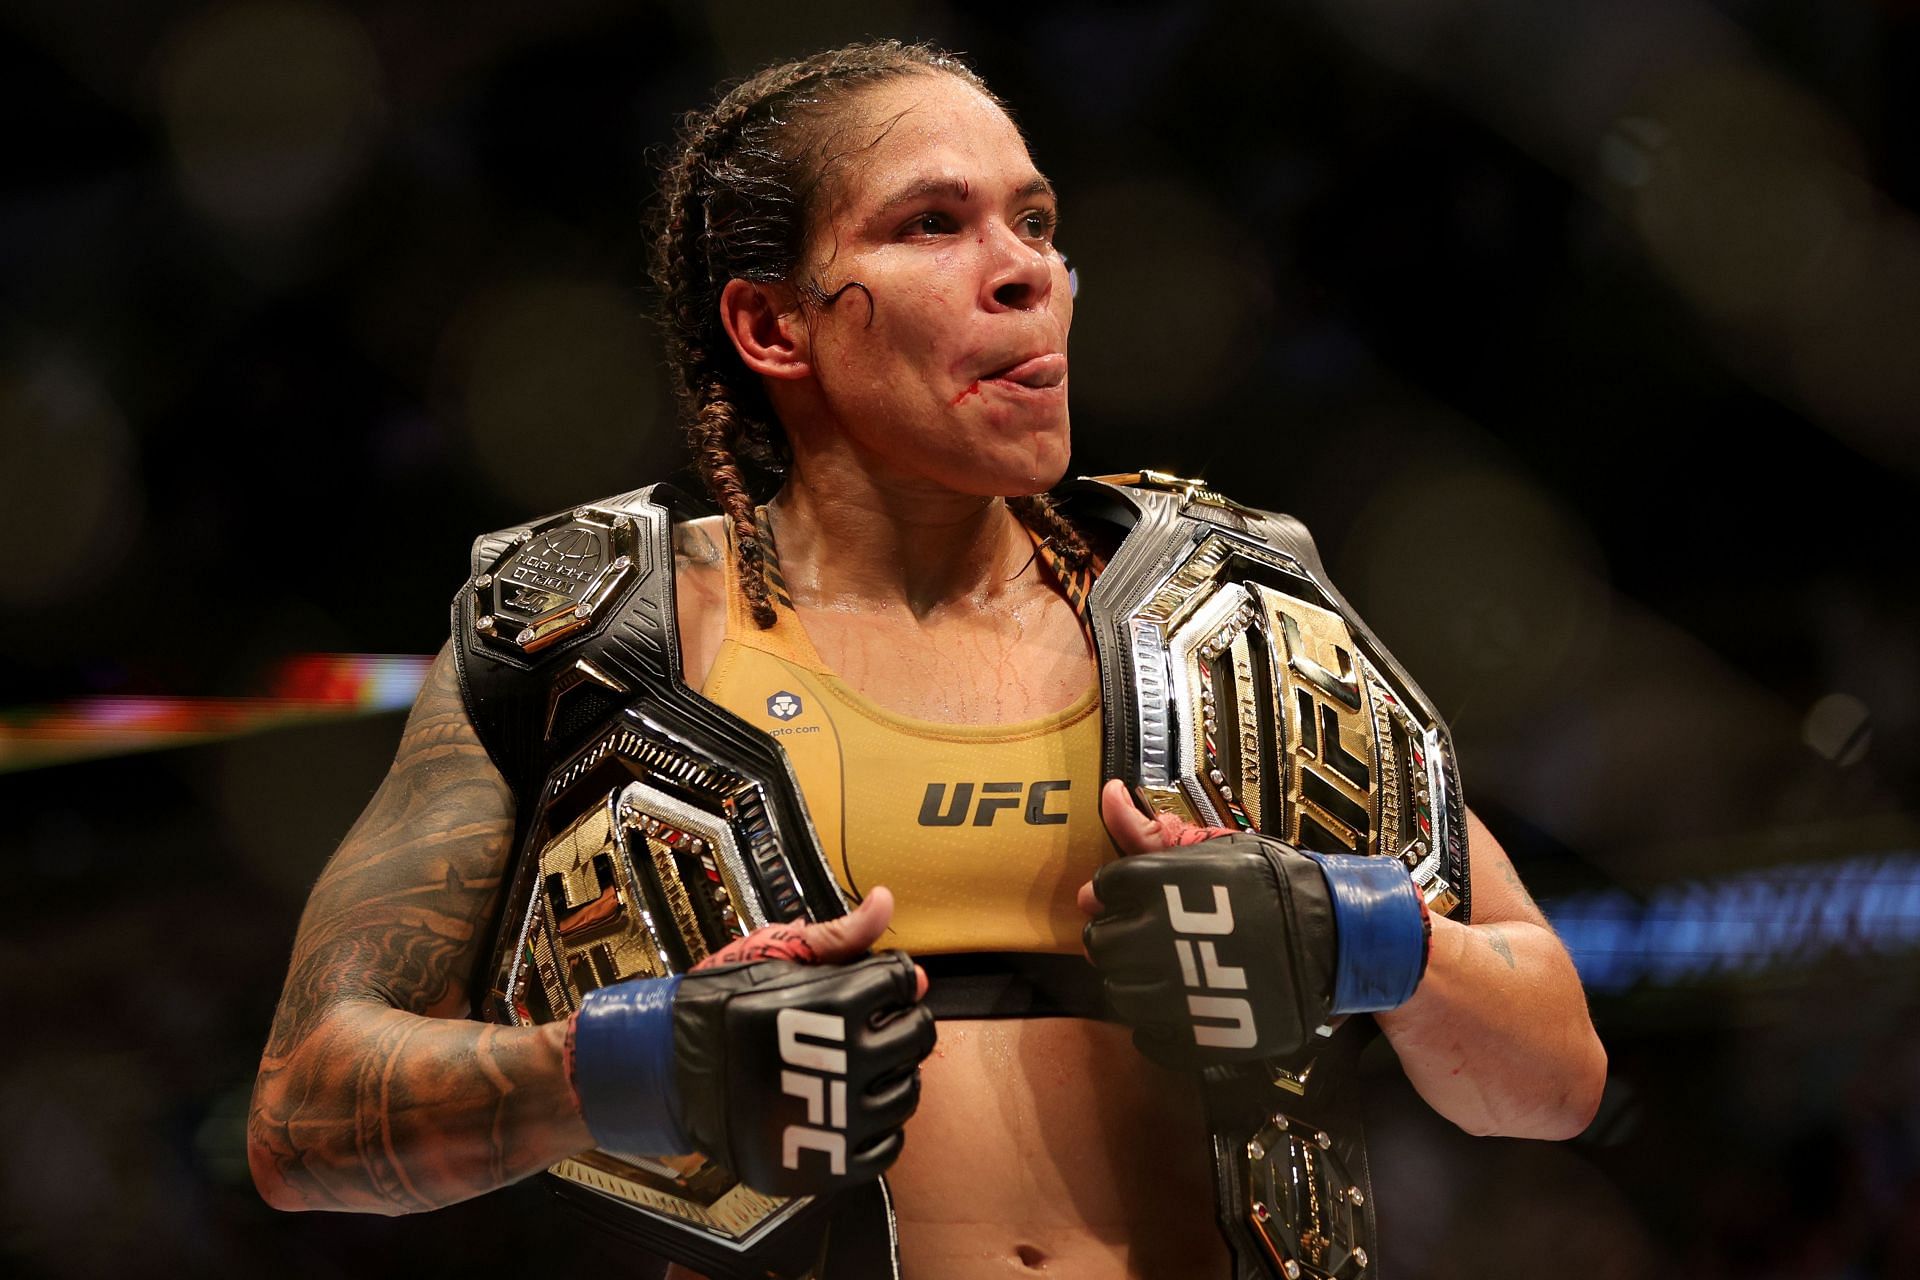 Amanda Nunes is considered by some as the greatest female MMA fighter